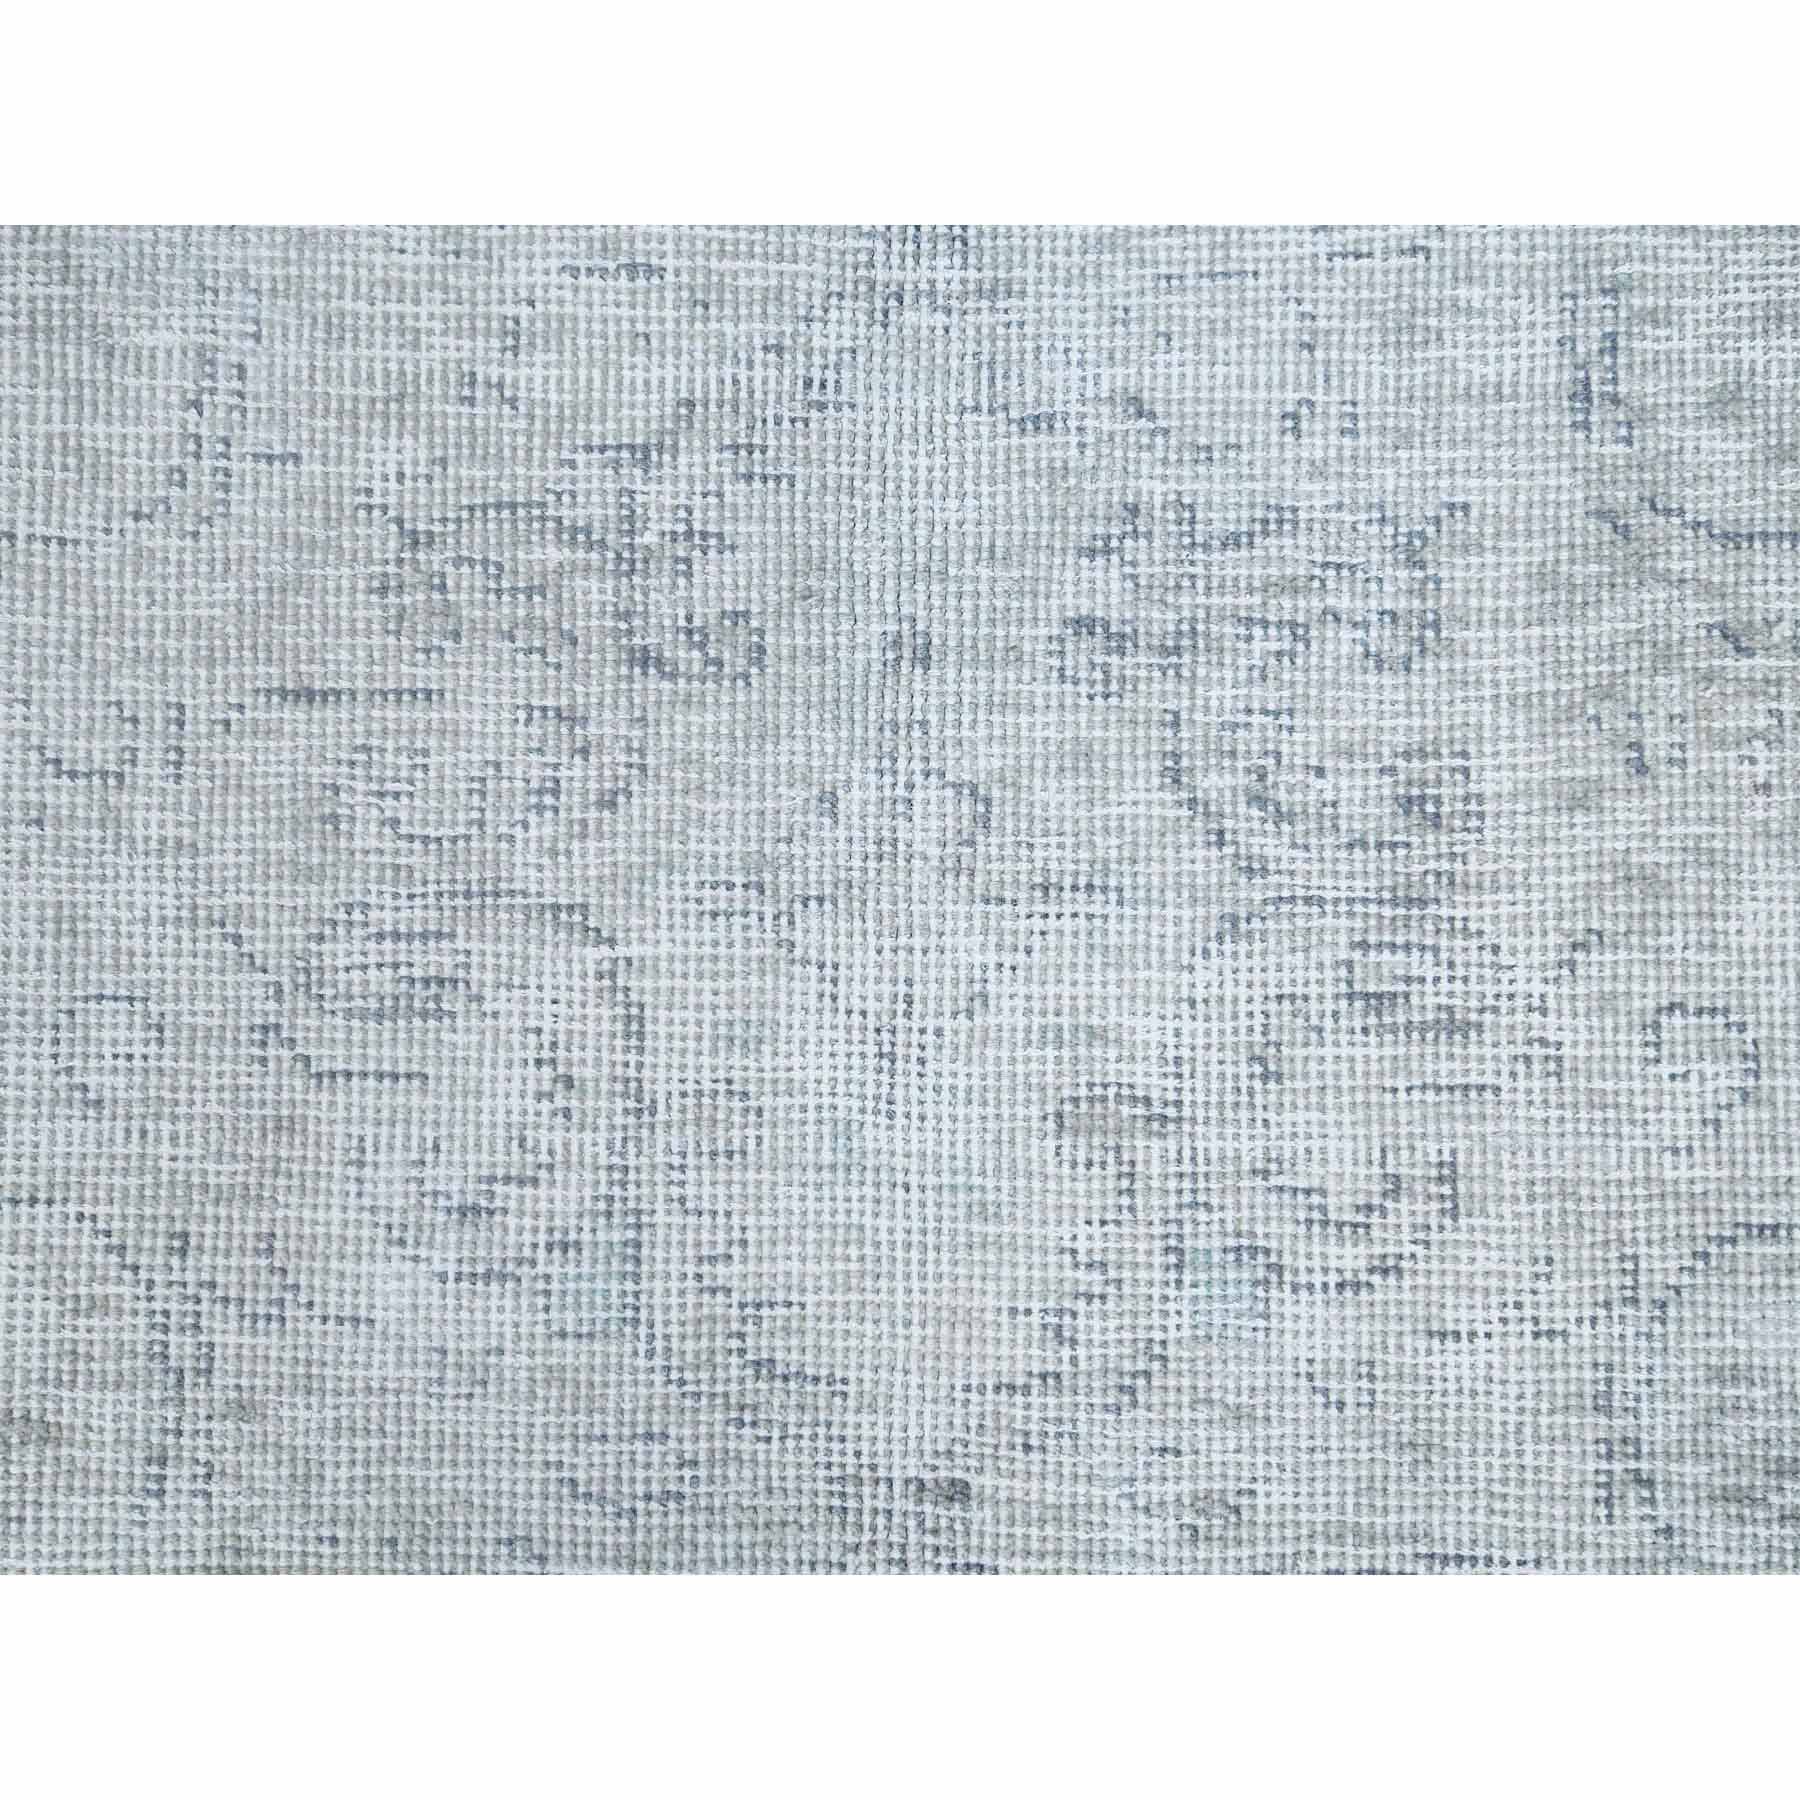 Overdyed-Vintage-Hand-Knotted-Rug-406405